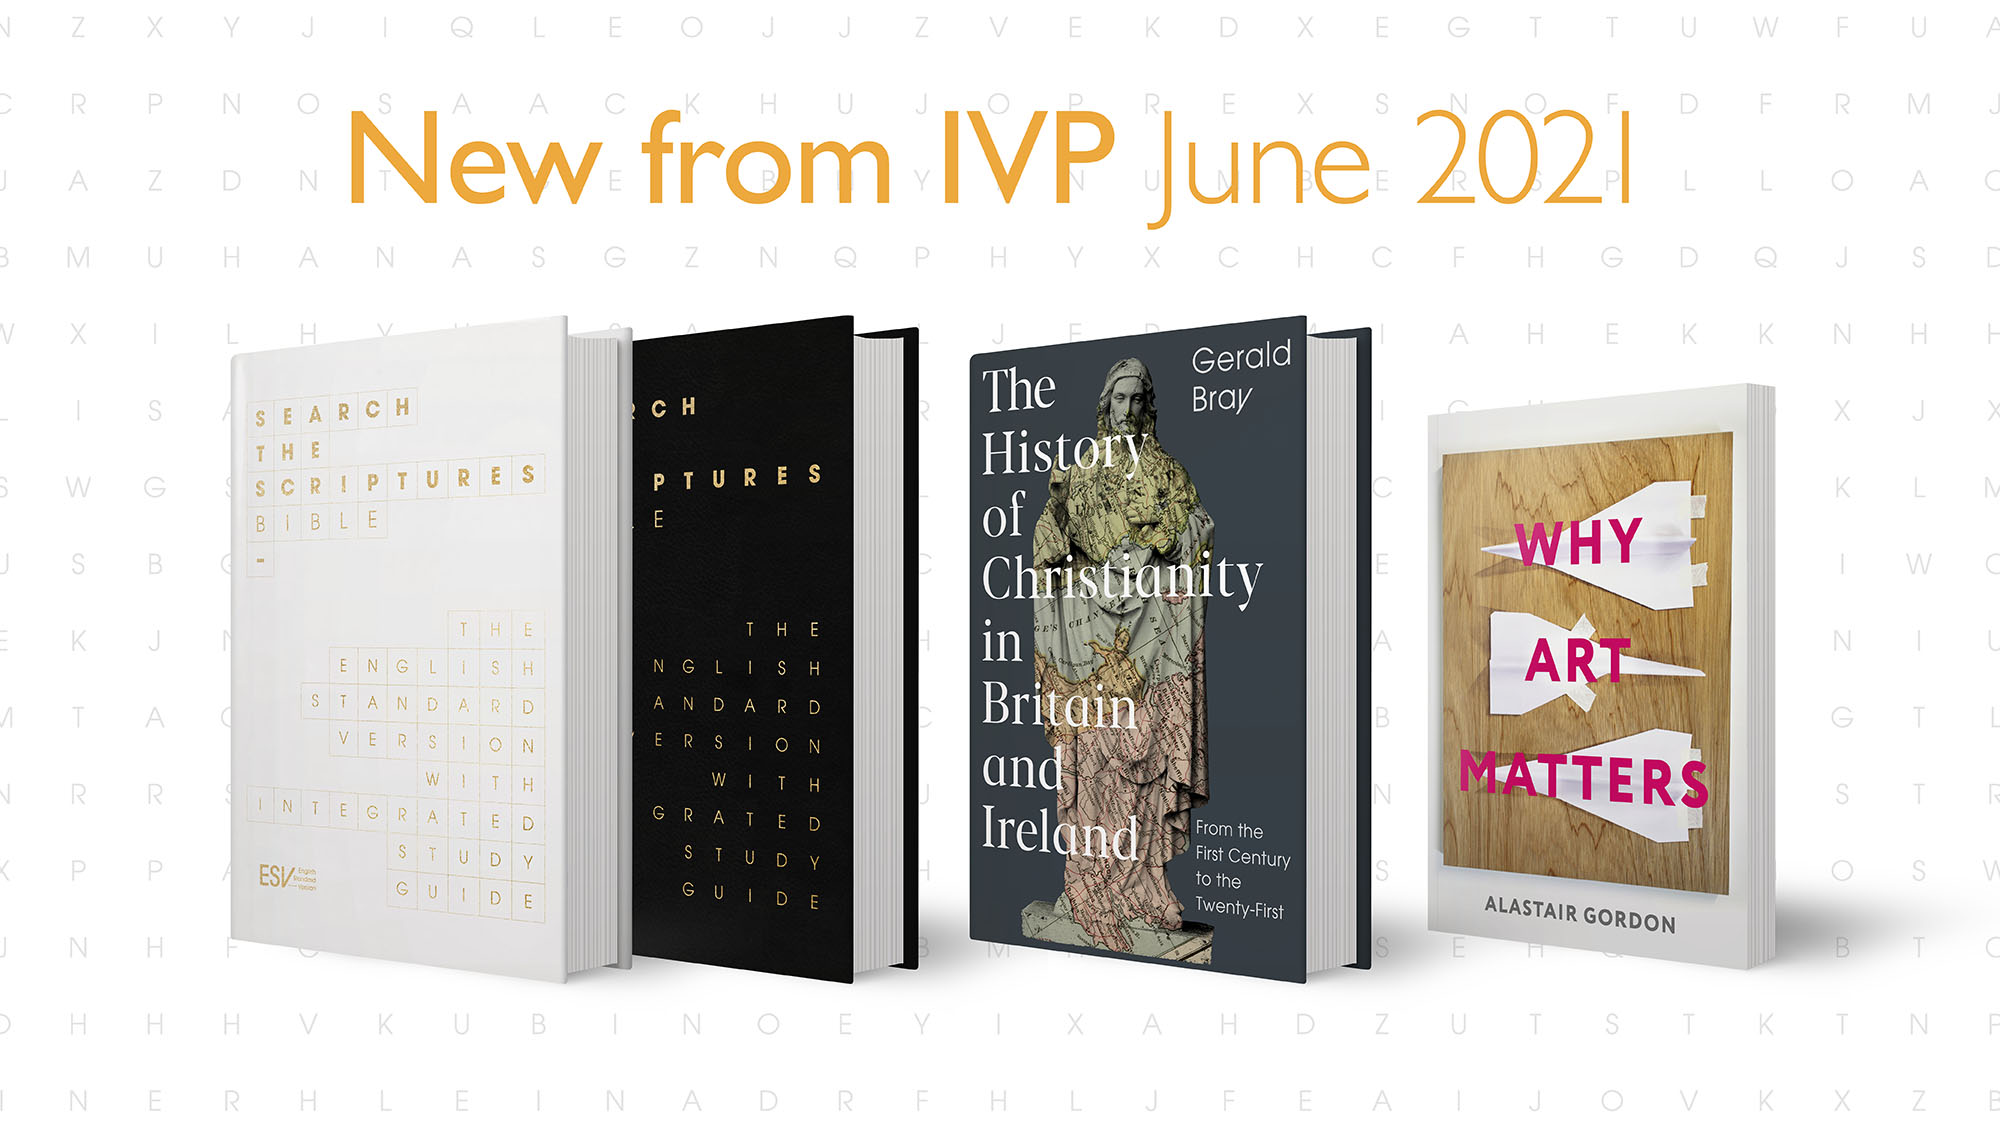 The IVP June 2021 Releases